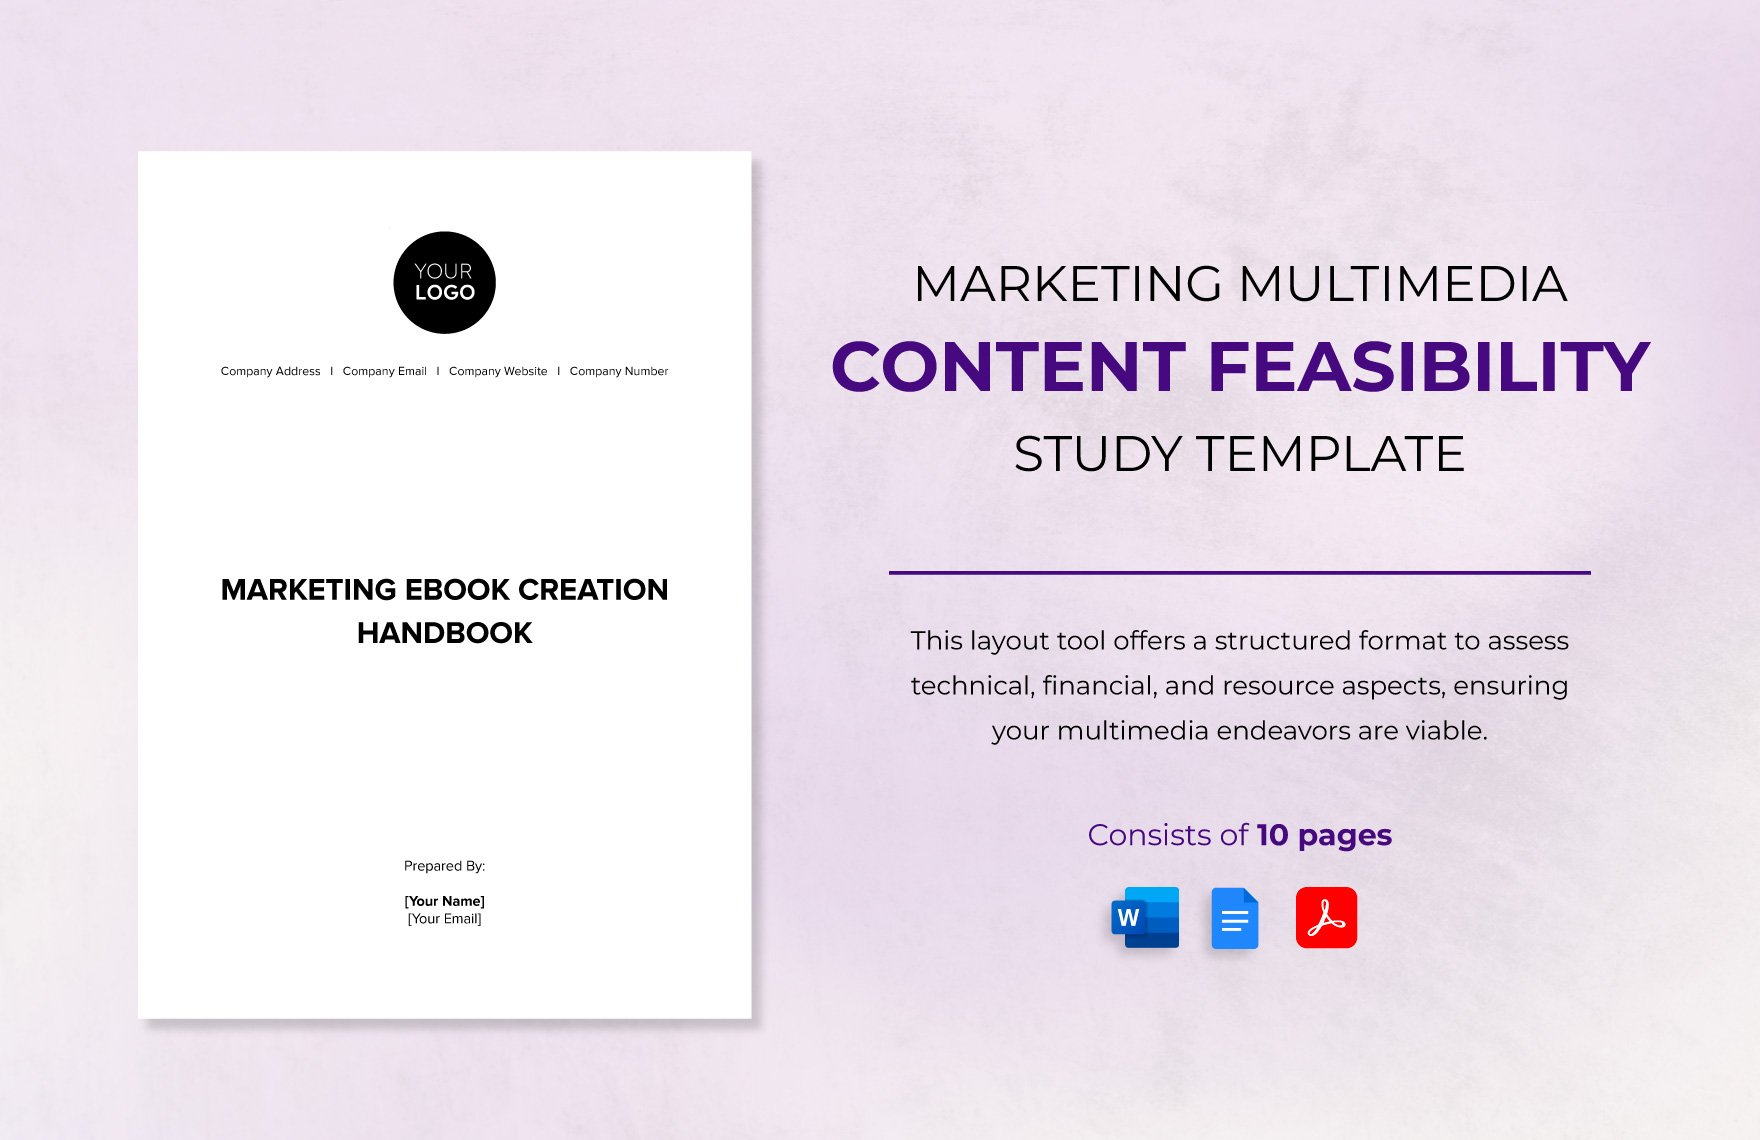 Marketing Multimedia Content Feasibility Study Template